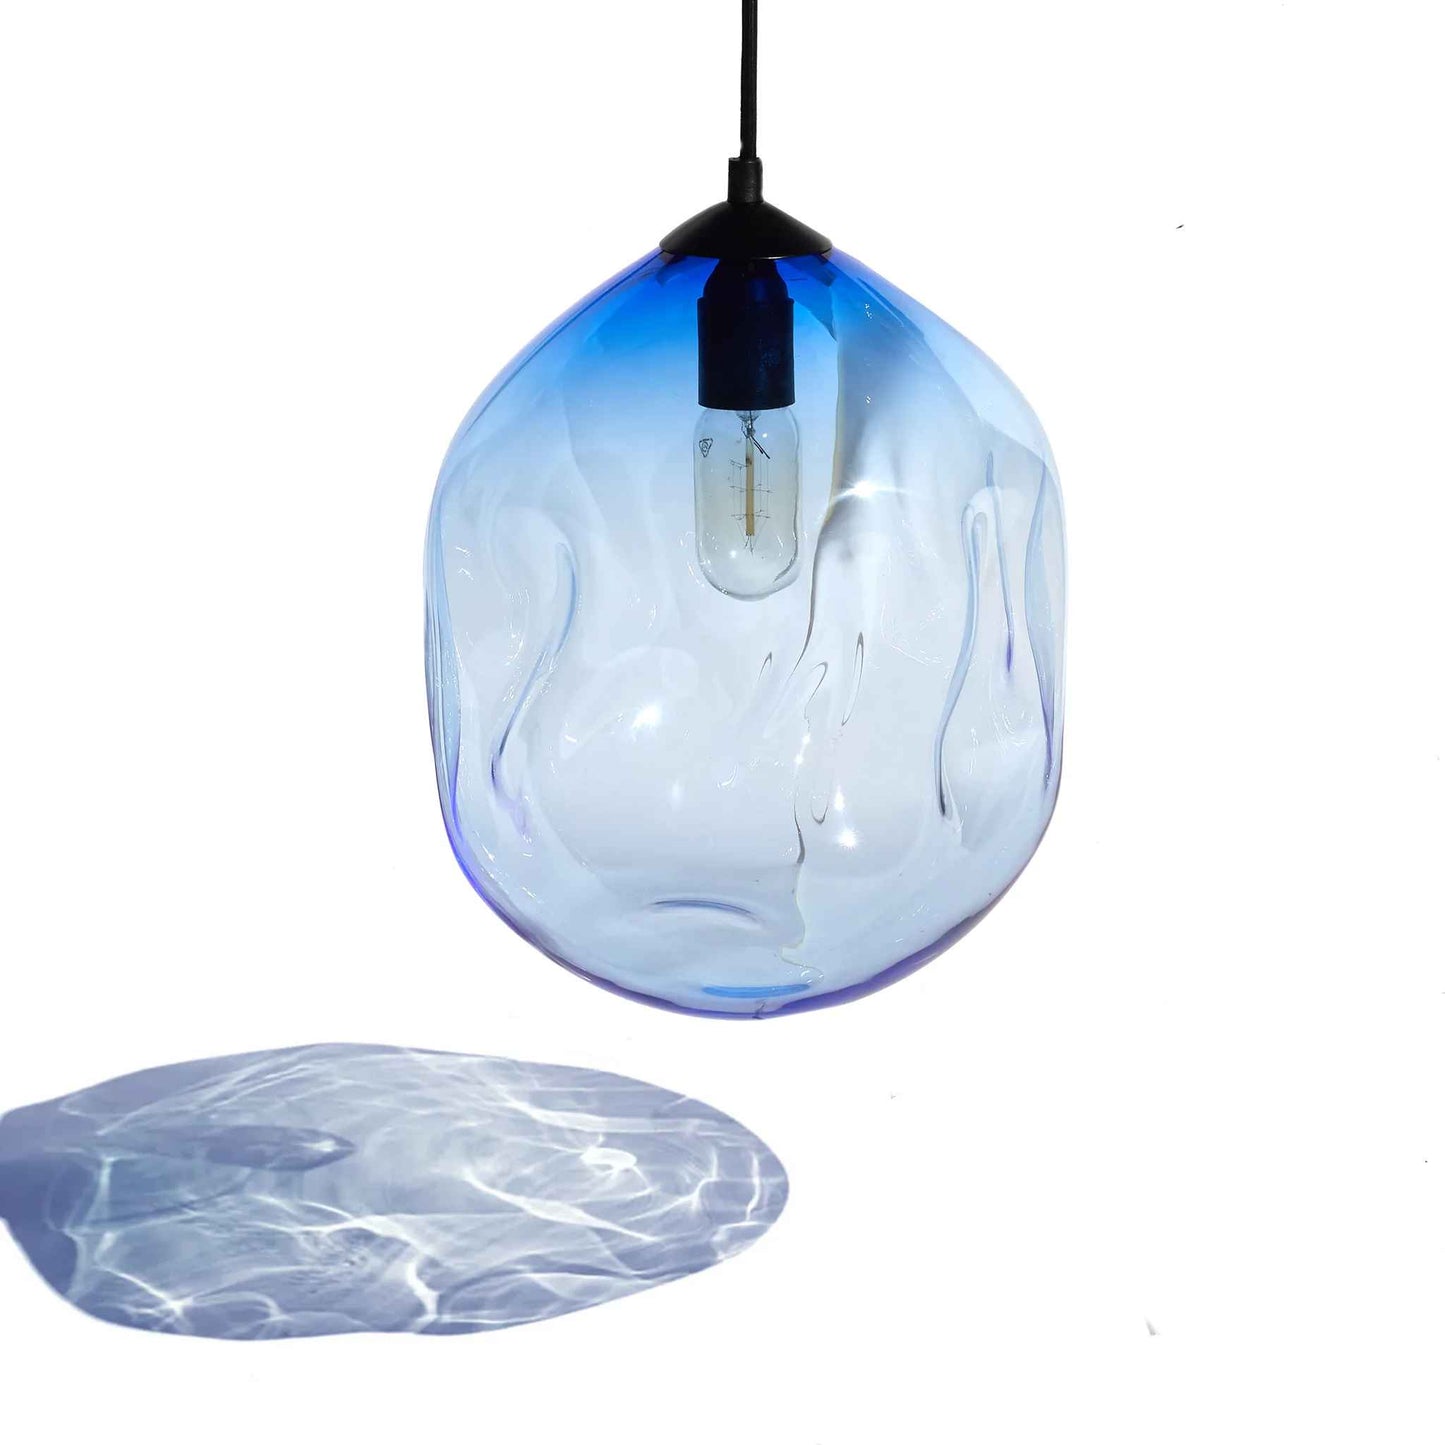 Deflated Lamp / Pendant - Large (33cm) - Cerulean Blue - made to order